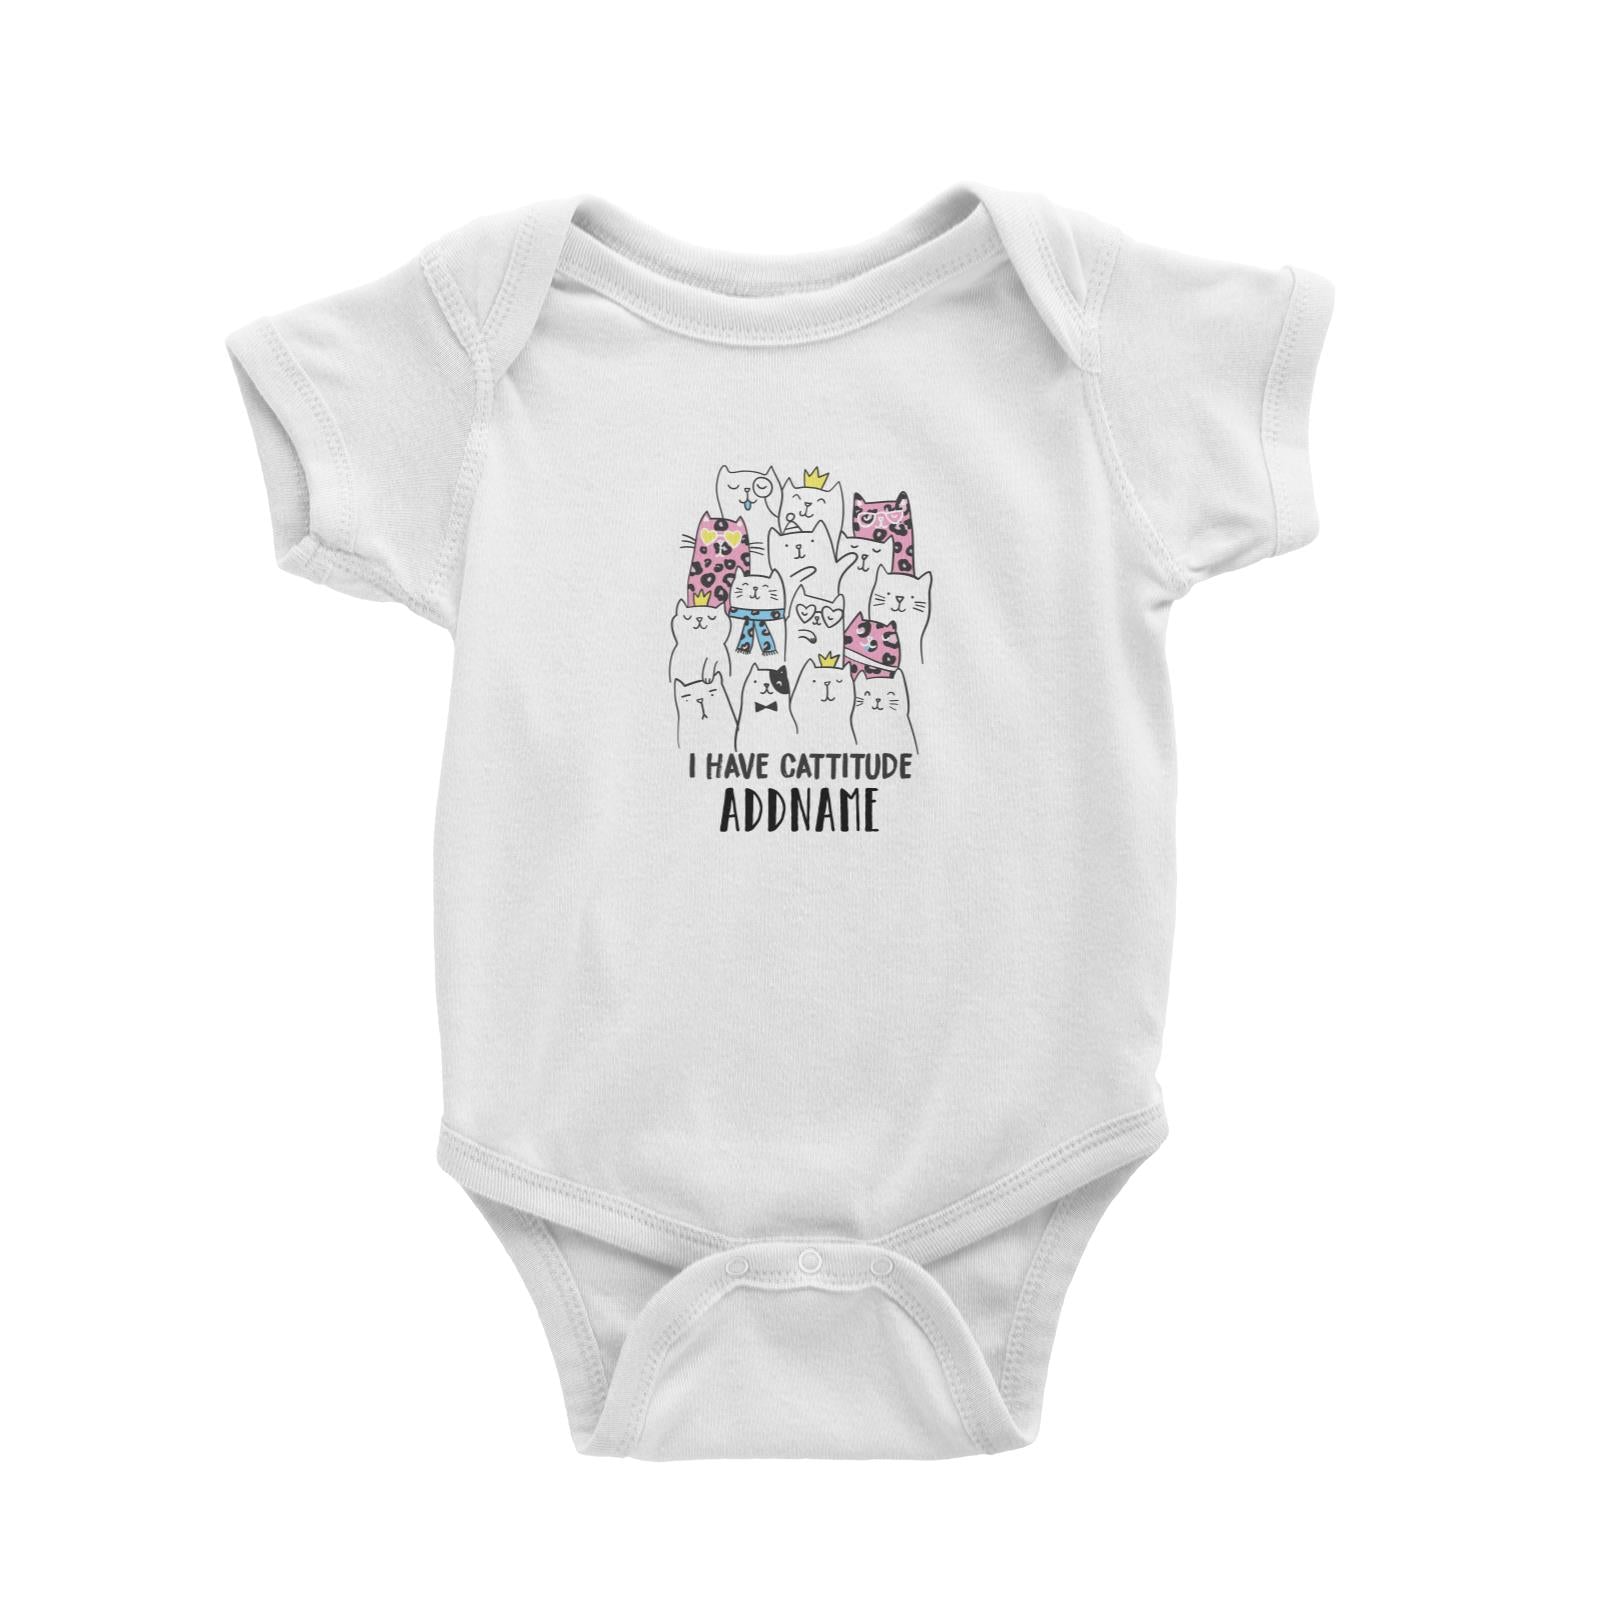 Cool Vibrant Series I Have Cattitude Addname Baby Romper [SALE]